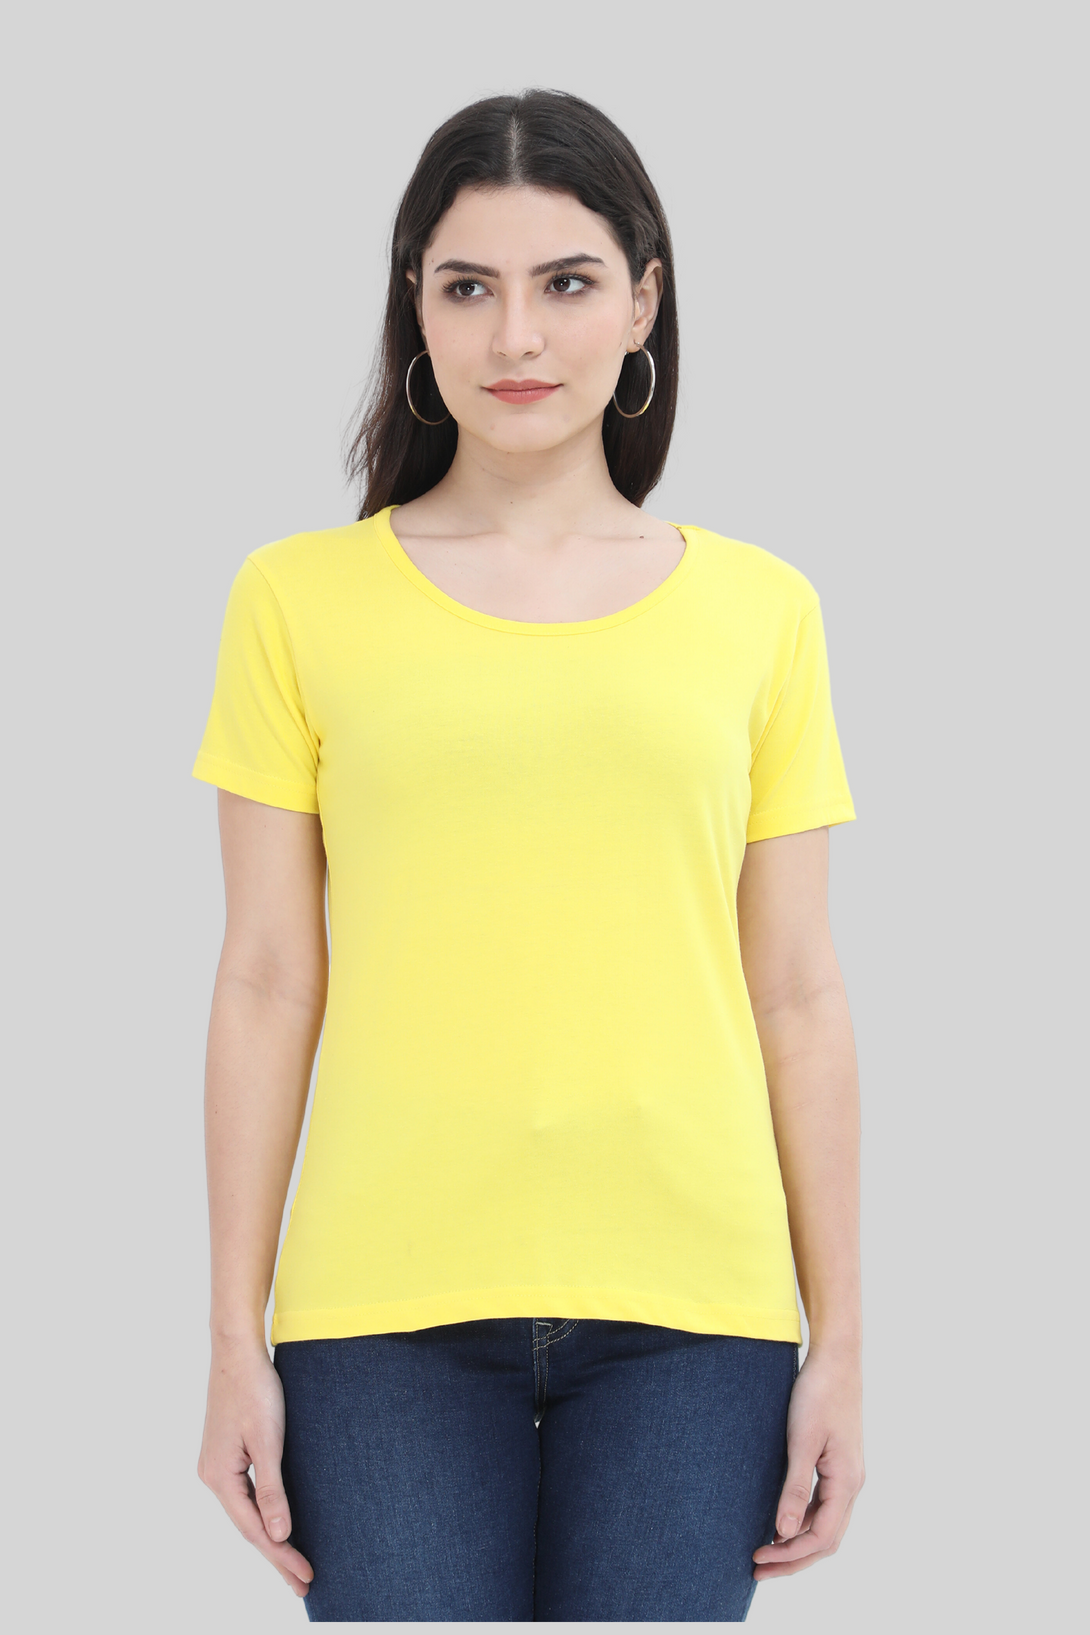 Bright Yellow Scoop Neck T-Shirt For Women - WowWaves - 1